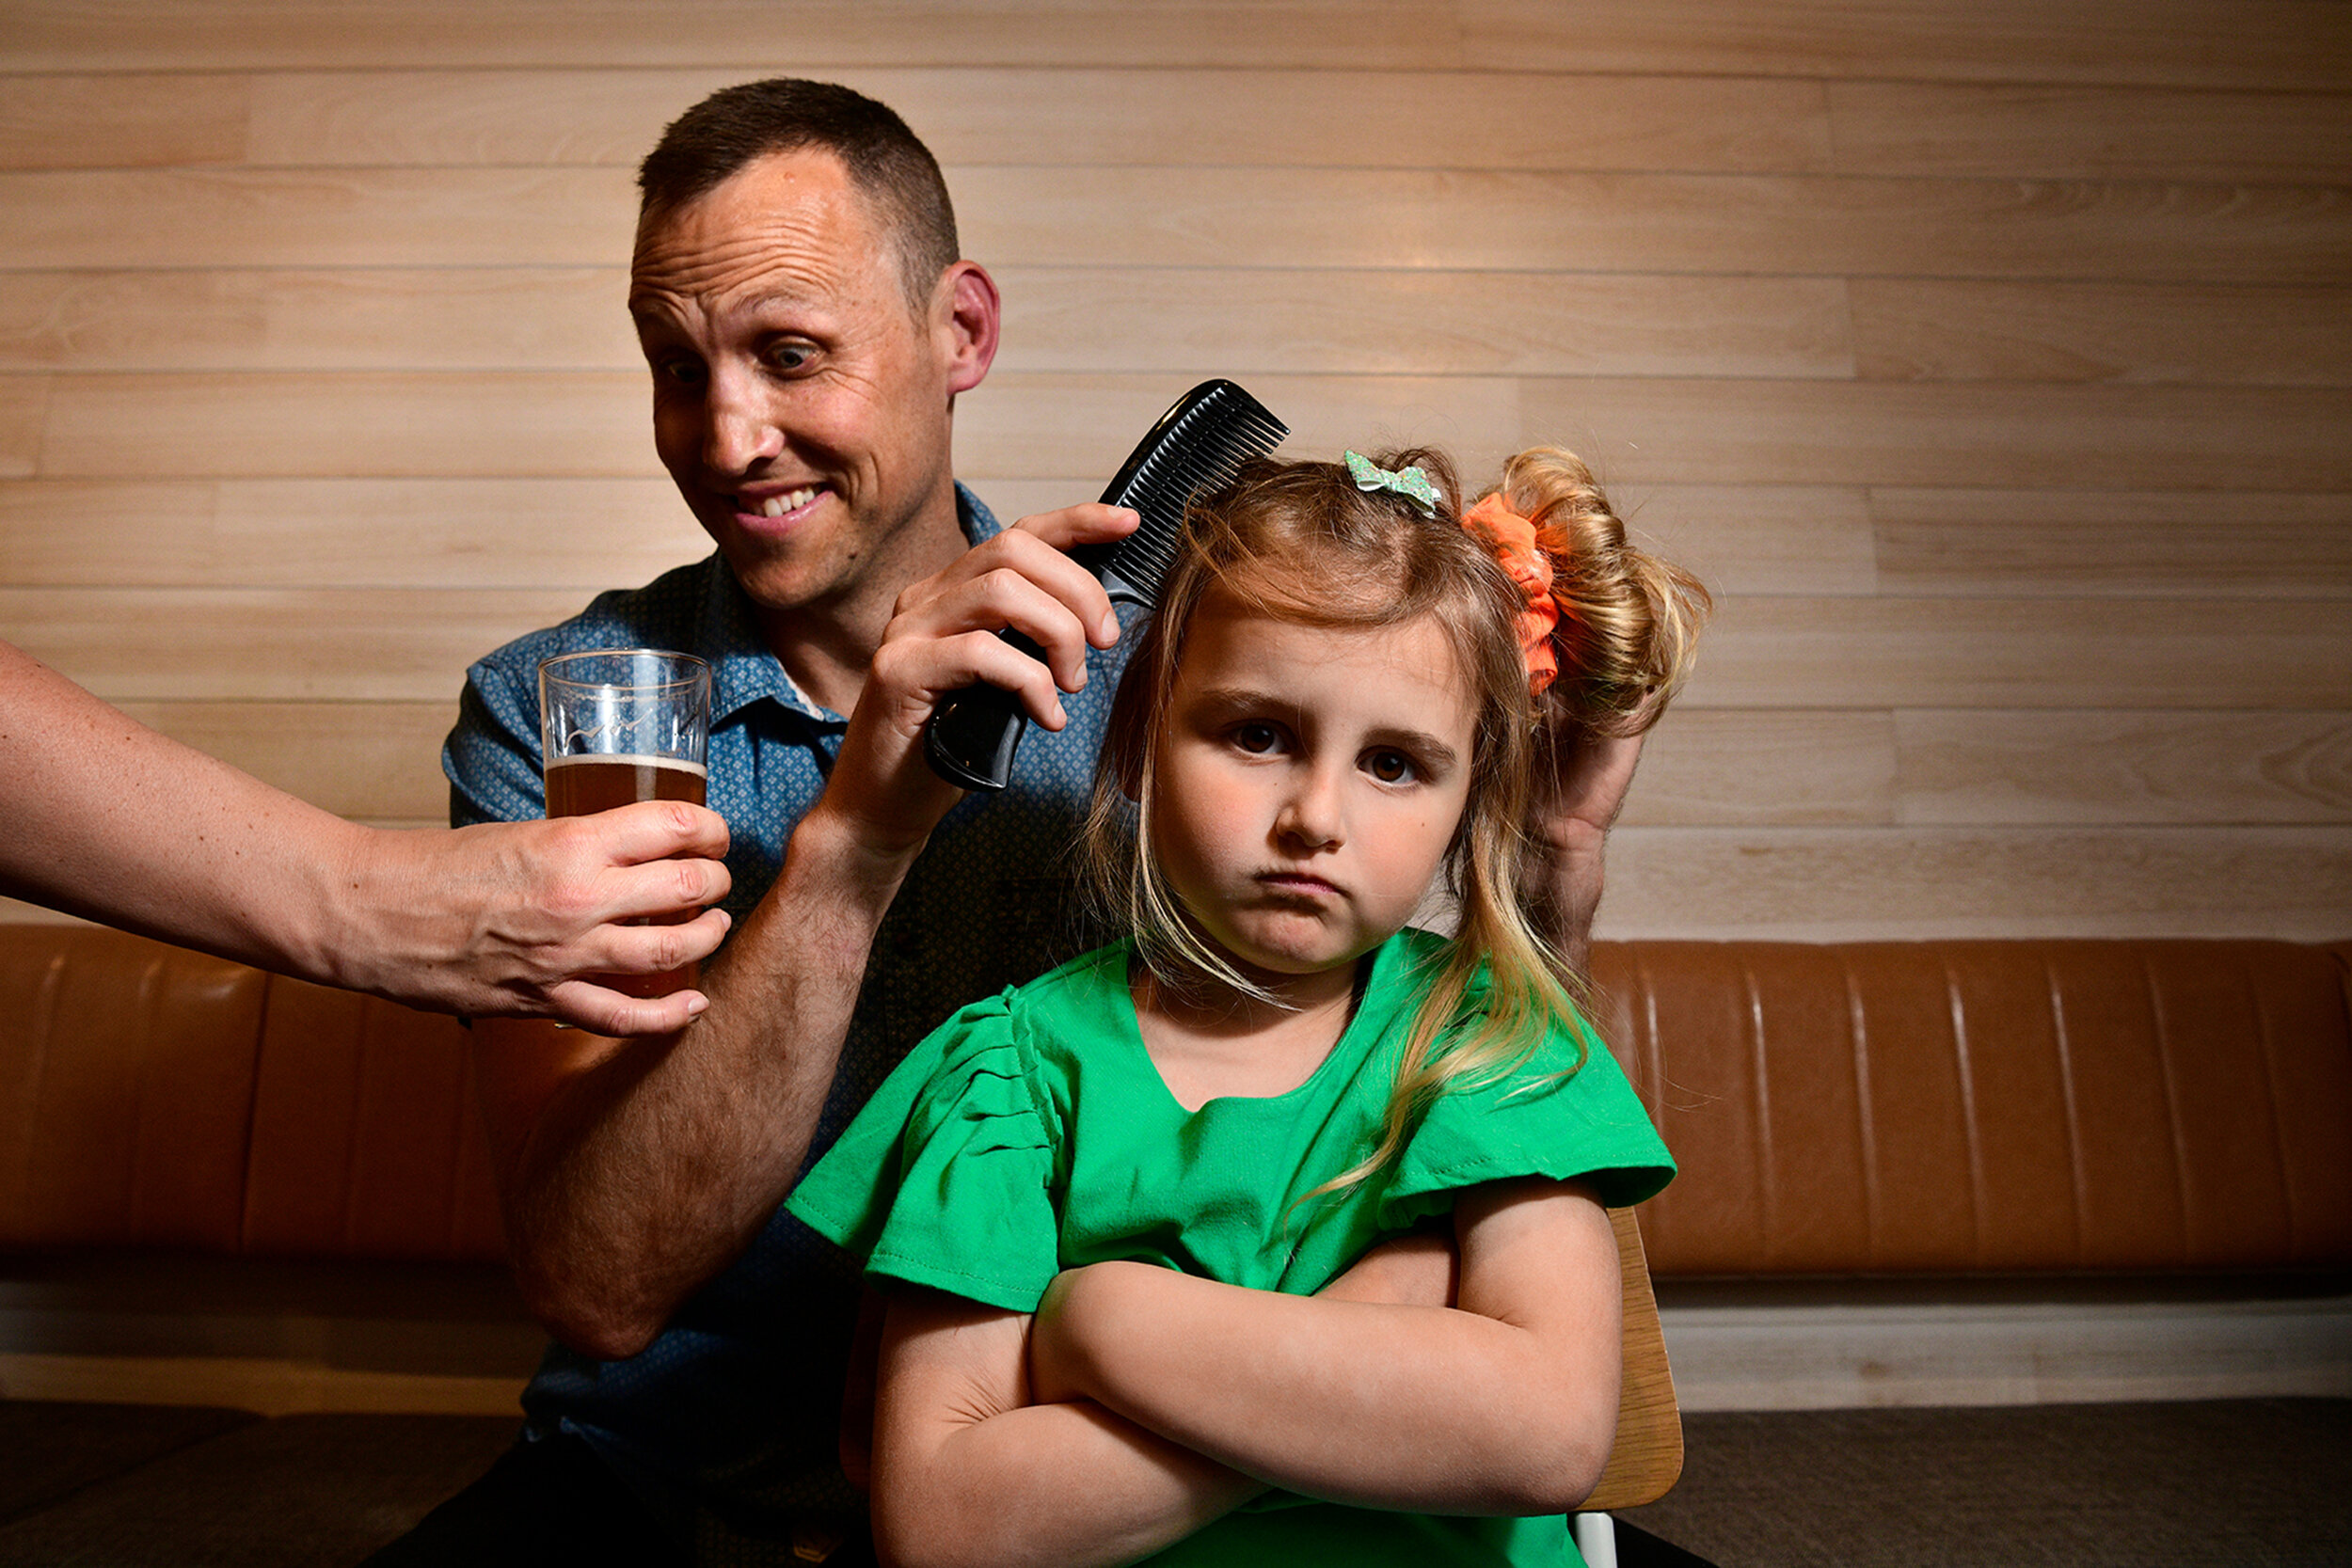  5.9.18- Lulu, 6, waits patiently as her dad Daniel Wakelin tries to do her hair at The Moseley, Glenelg. The father-daughter duo will take part in the 'Daddy-Daughter Haircare Day' on September 15th at both The Moseley and The Gully pubs, where dads